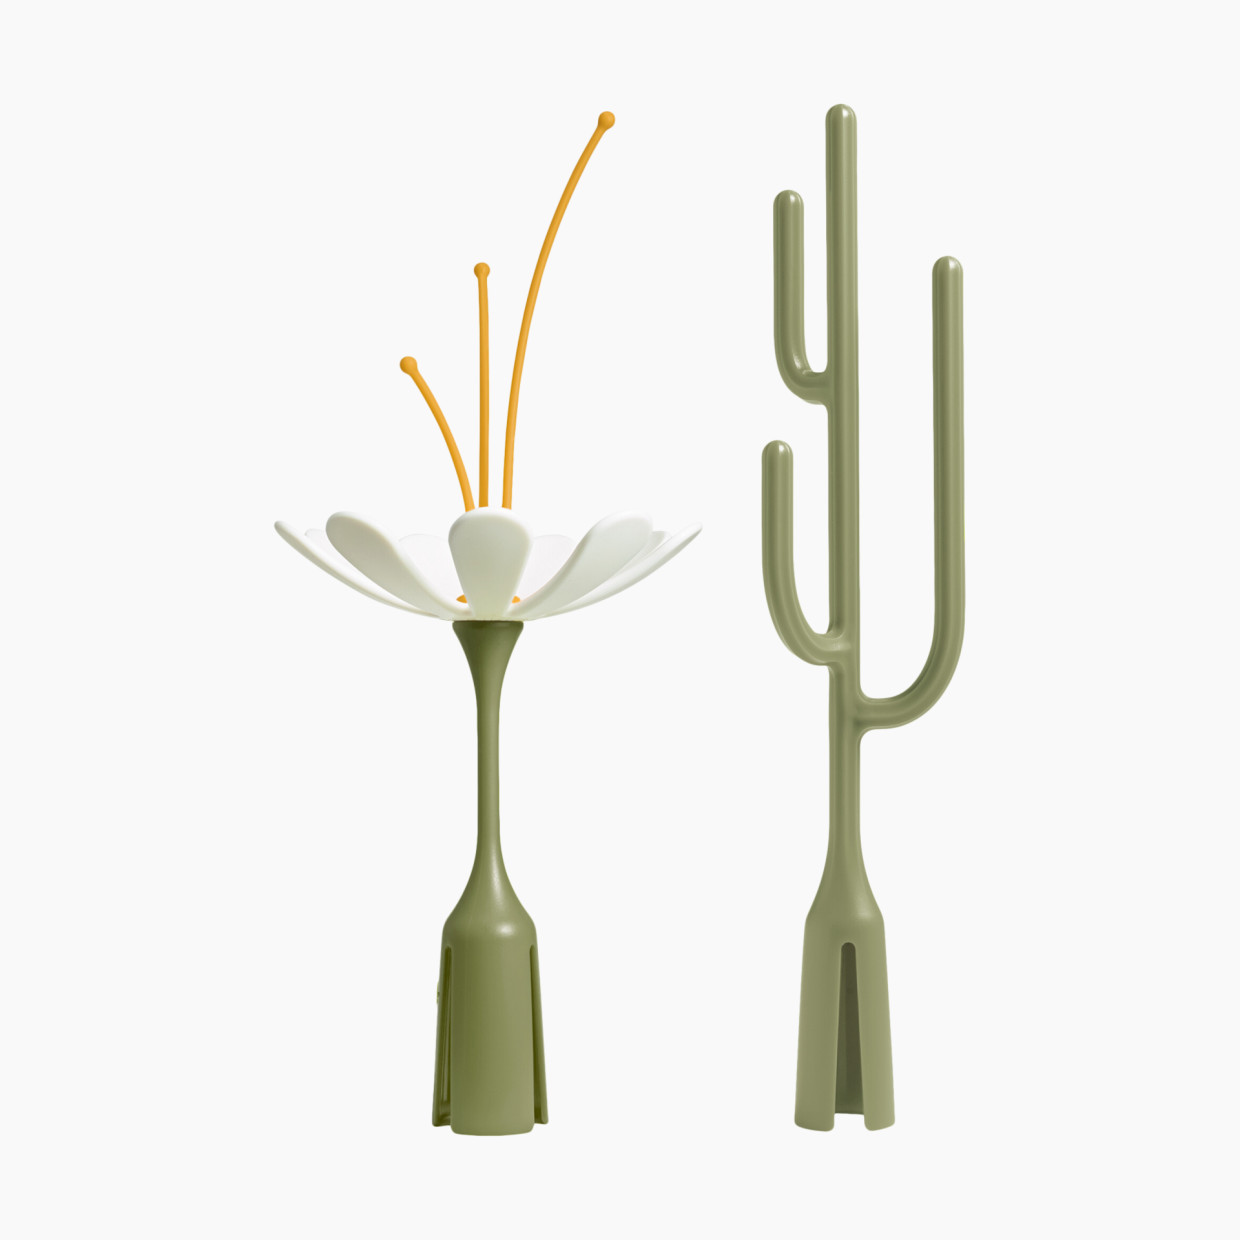 Boon Poke & Stem Drying Rack Accessory (2 Pack) - Sage Green.